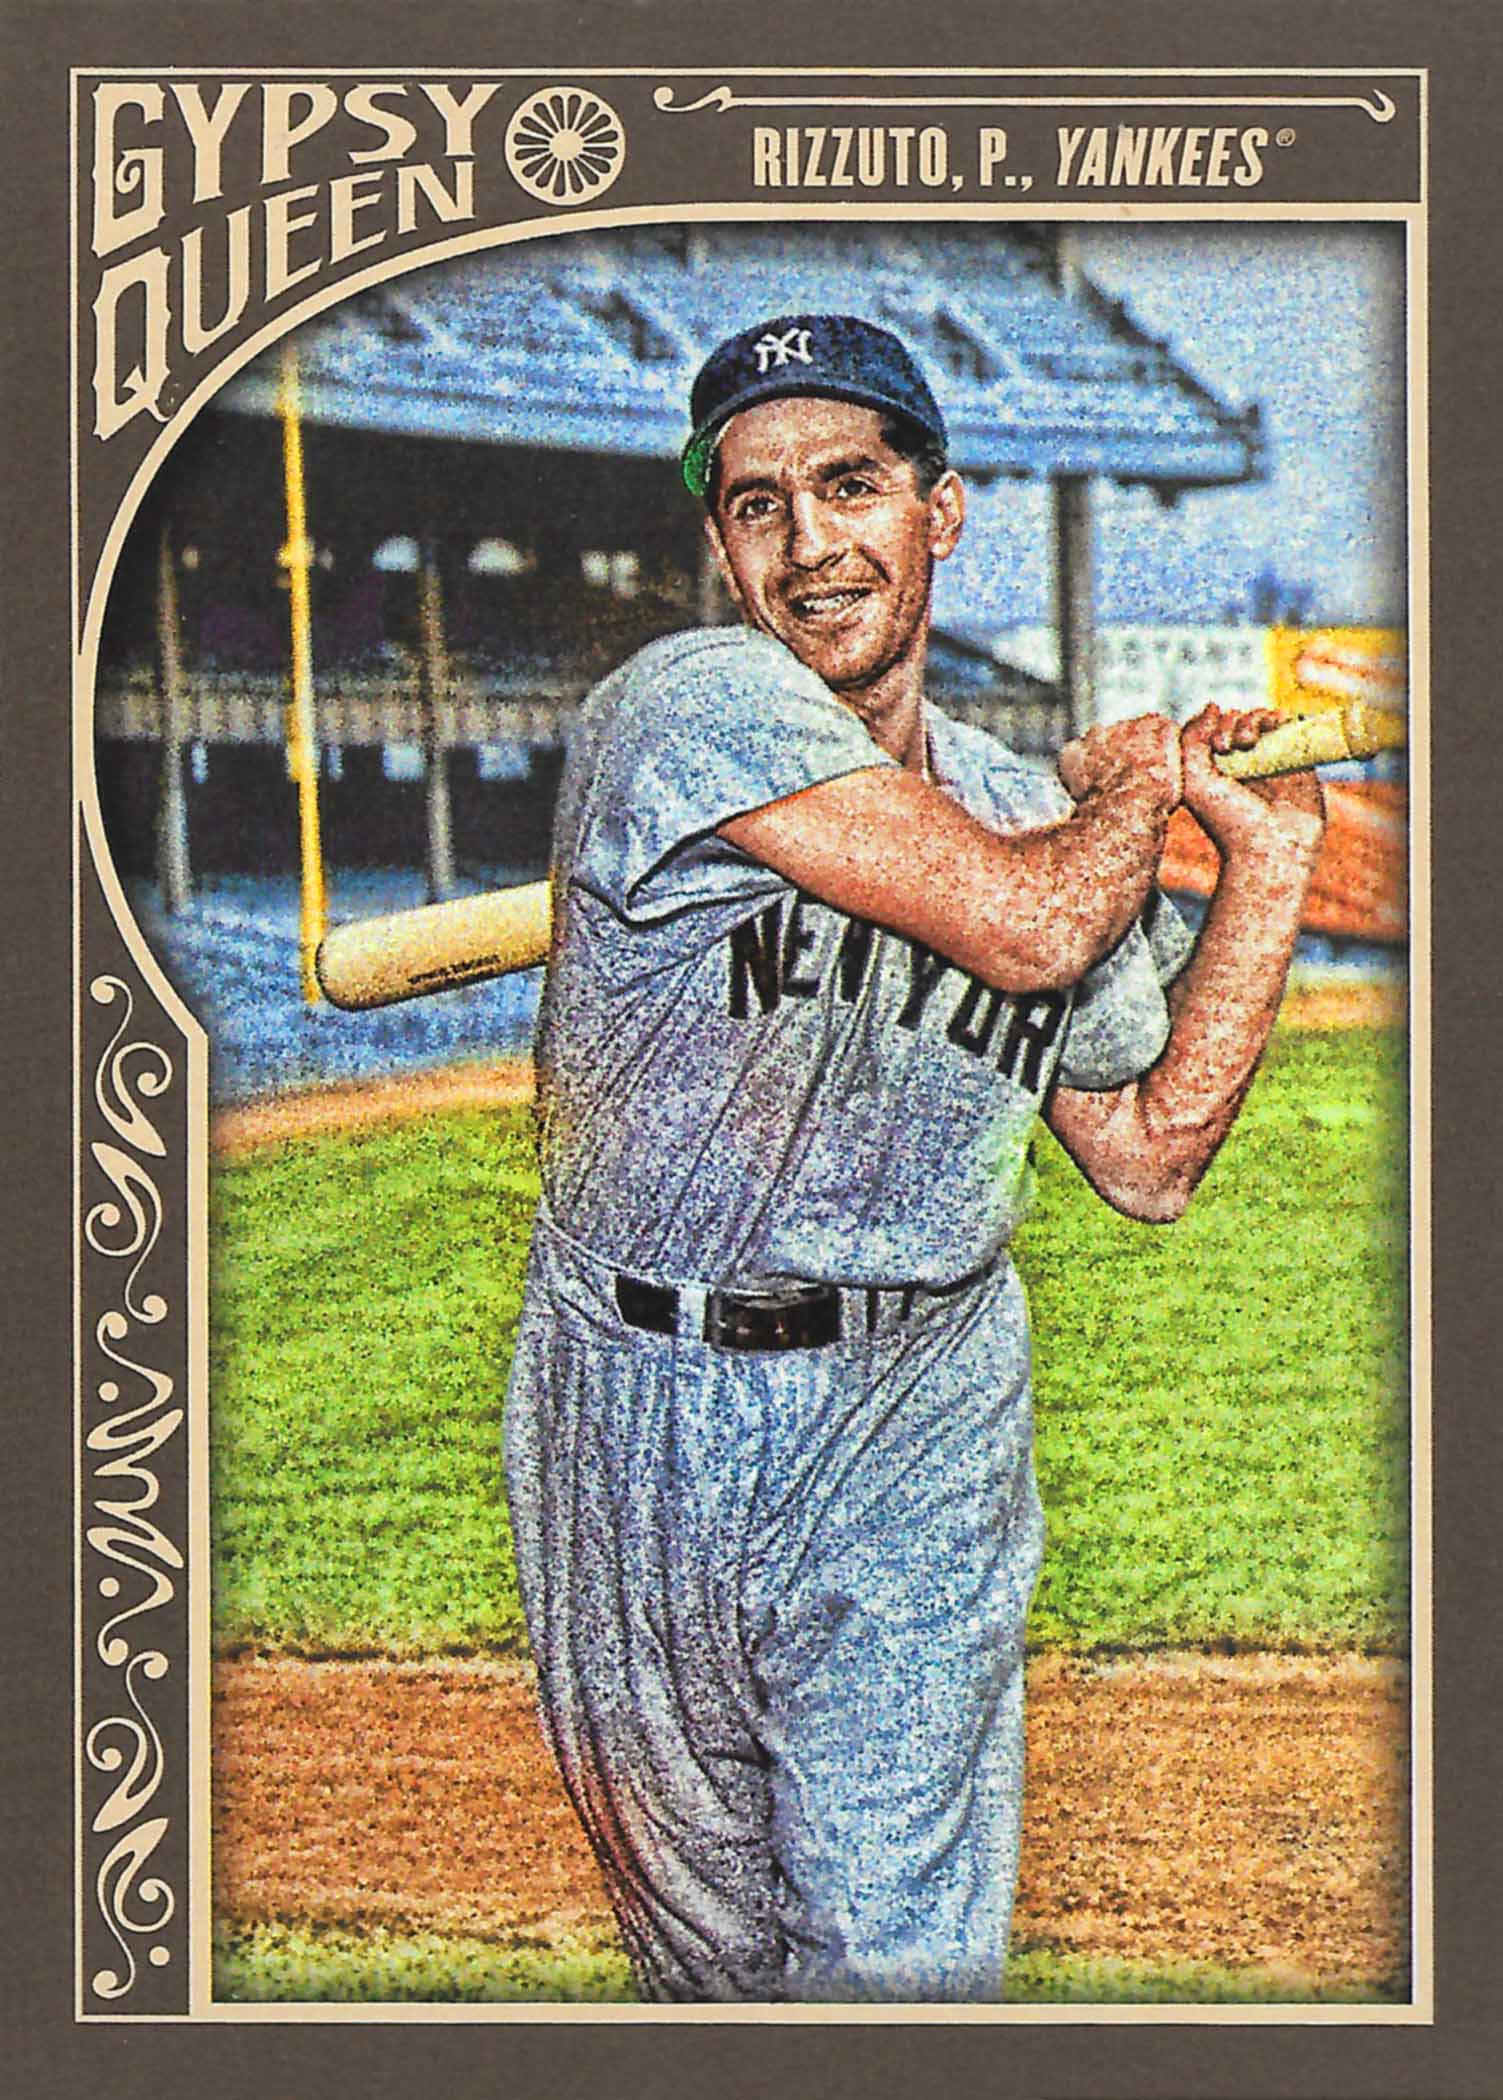 2015 Topps Gypsy Queen